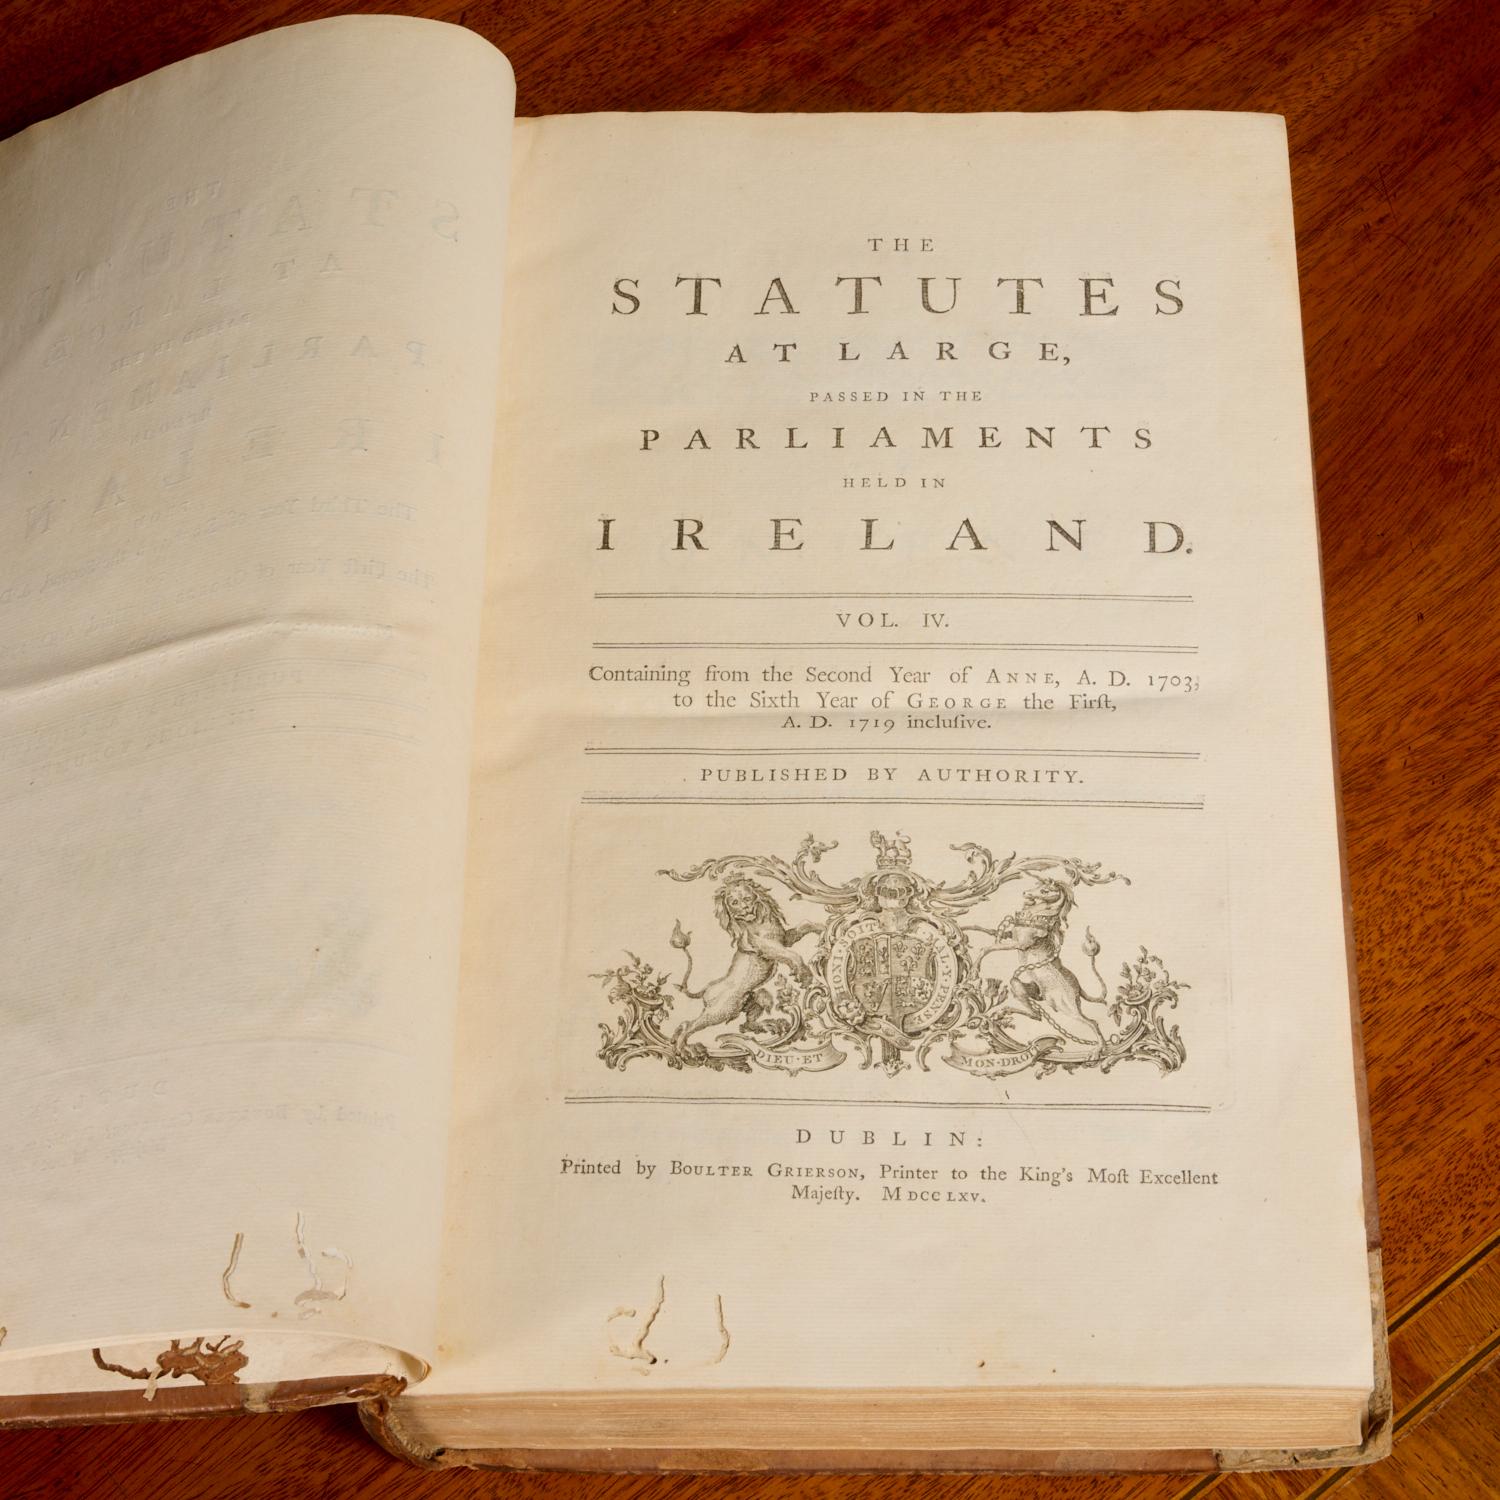 Hand-Crafted Ireland House of Commons 1753 Vol. III and Statutes at Large 1703-1719 Vol. IV For Sale